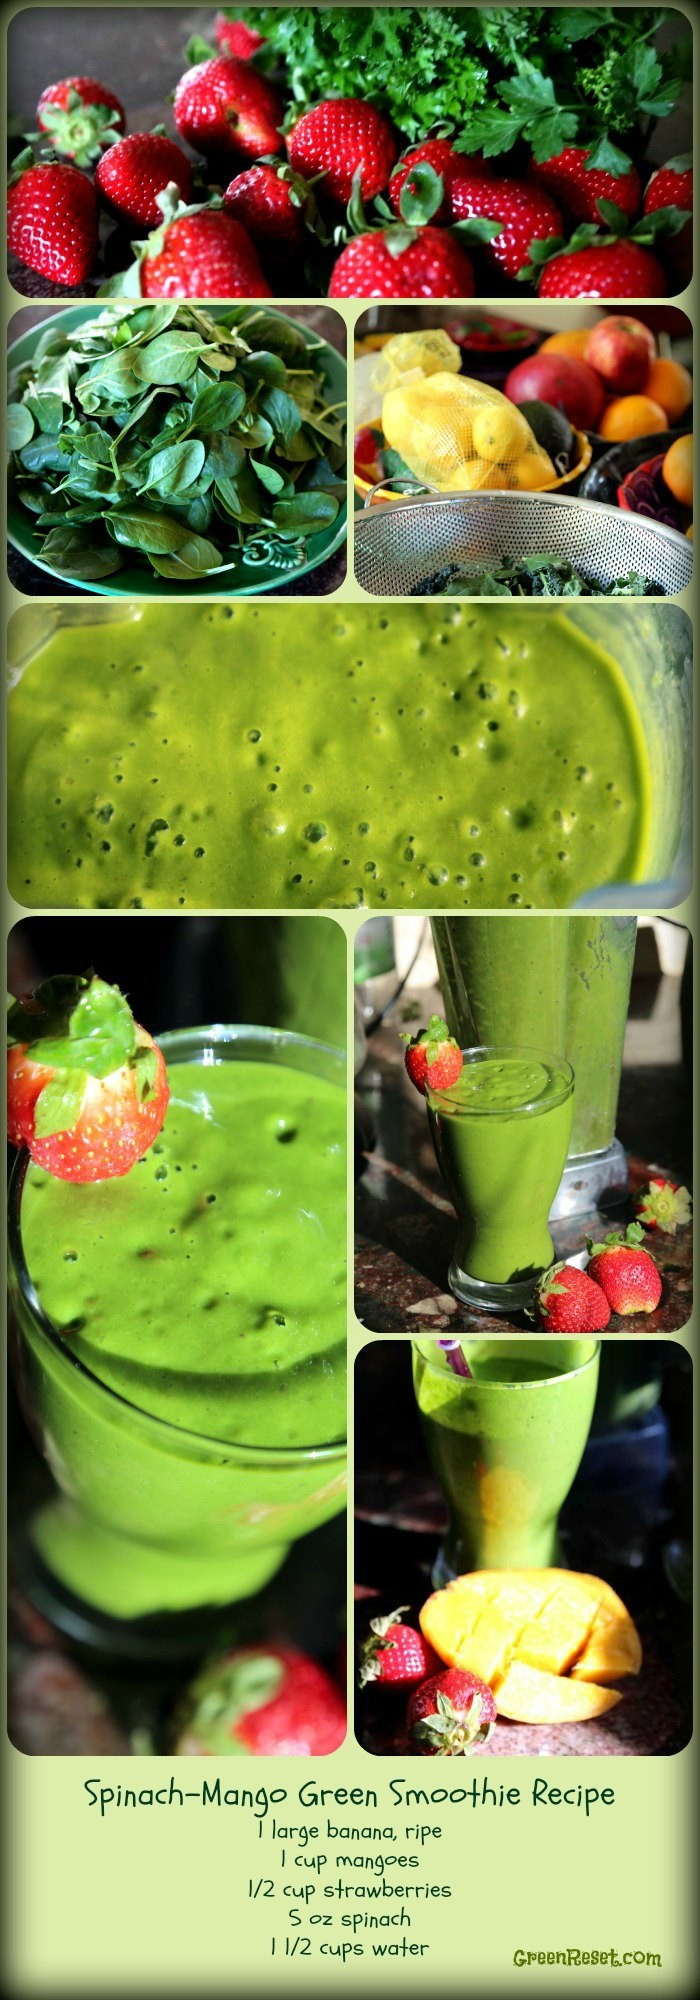 Healthy Smoothies With Spinach
 9 Breakfast Smoothies Plus 3 More Super Healthy Breakfast